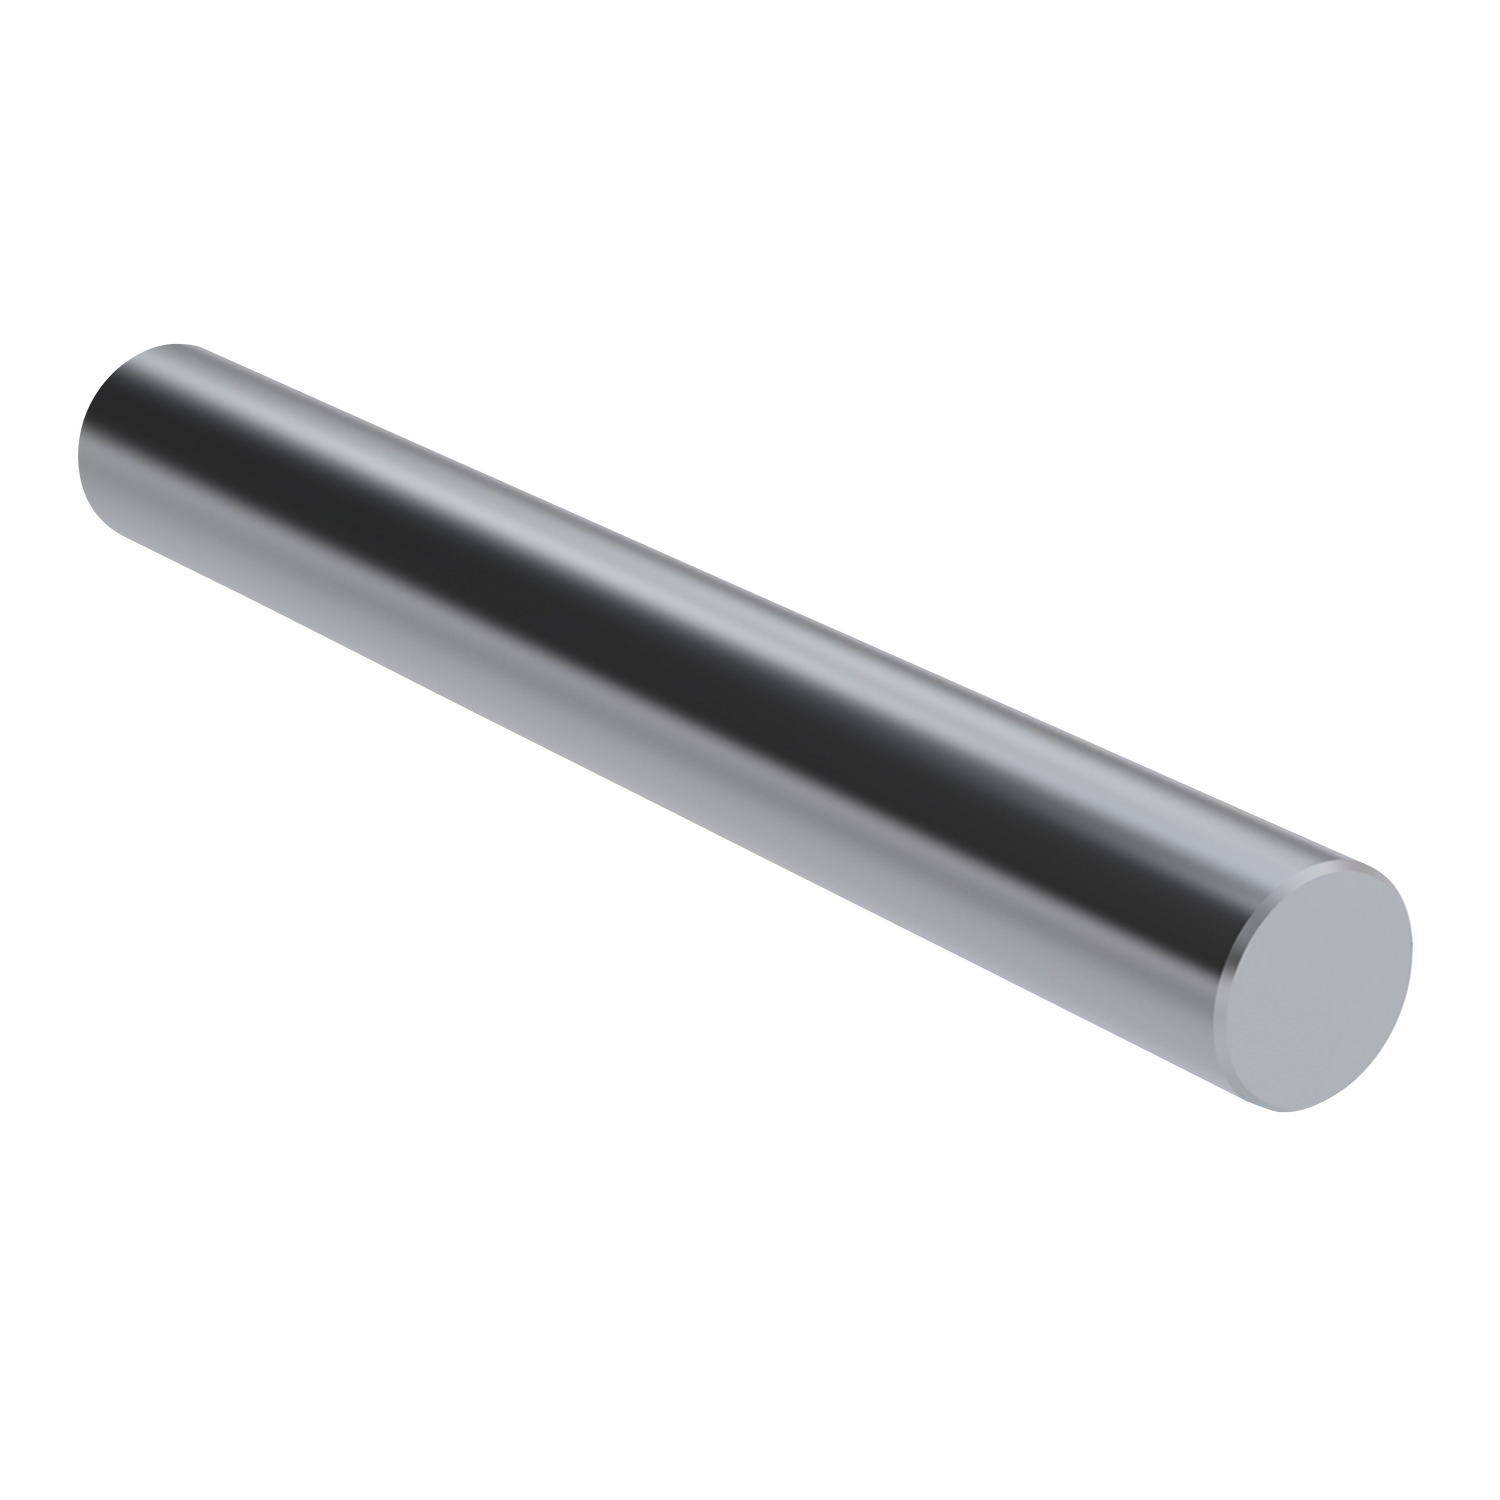 Steel Linear Shafts We stock a wide range of linear shafts and bearings with the associated ball bushings and carriages. See our linear shafts and bearings page.